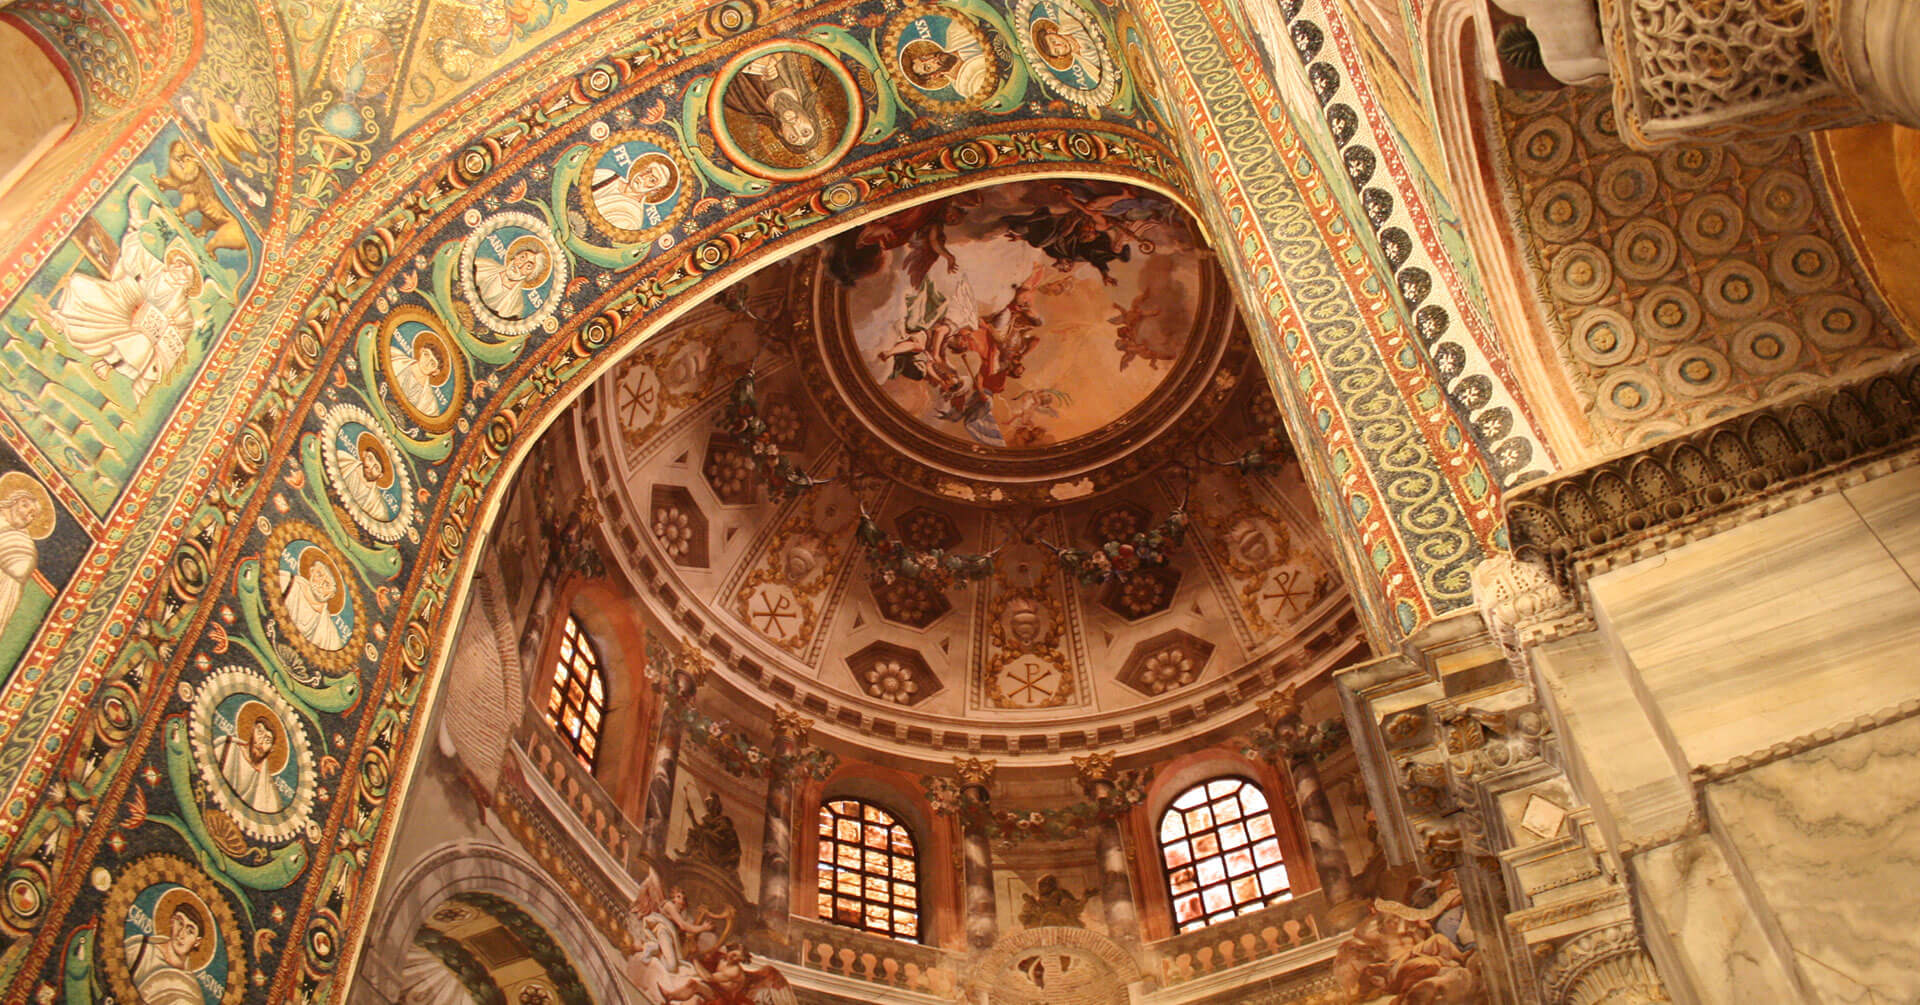 DISCOVER THE UNESCO MONUMENTS OF RAVENNA WITH US